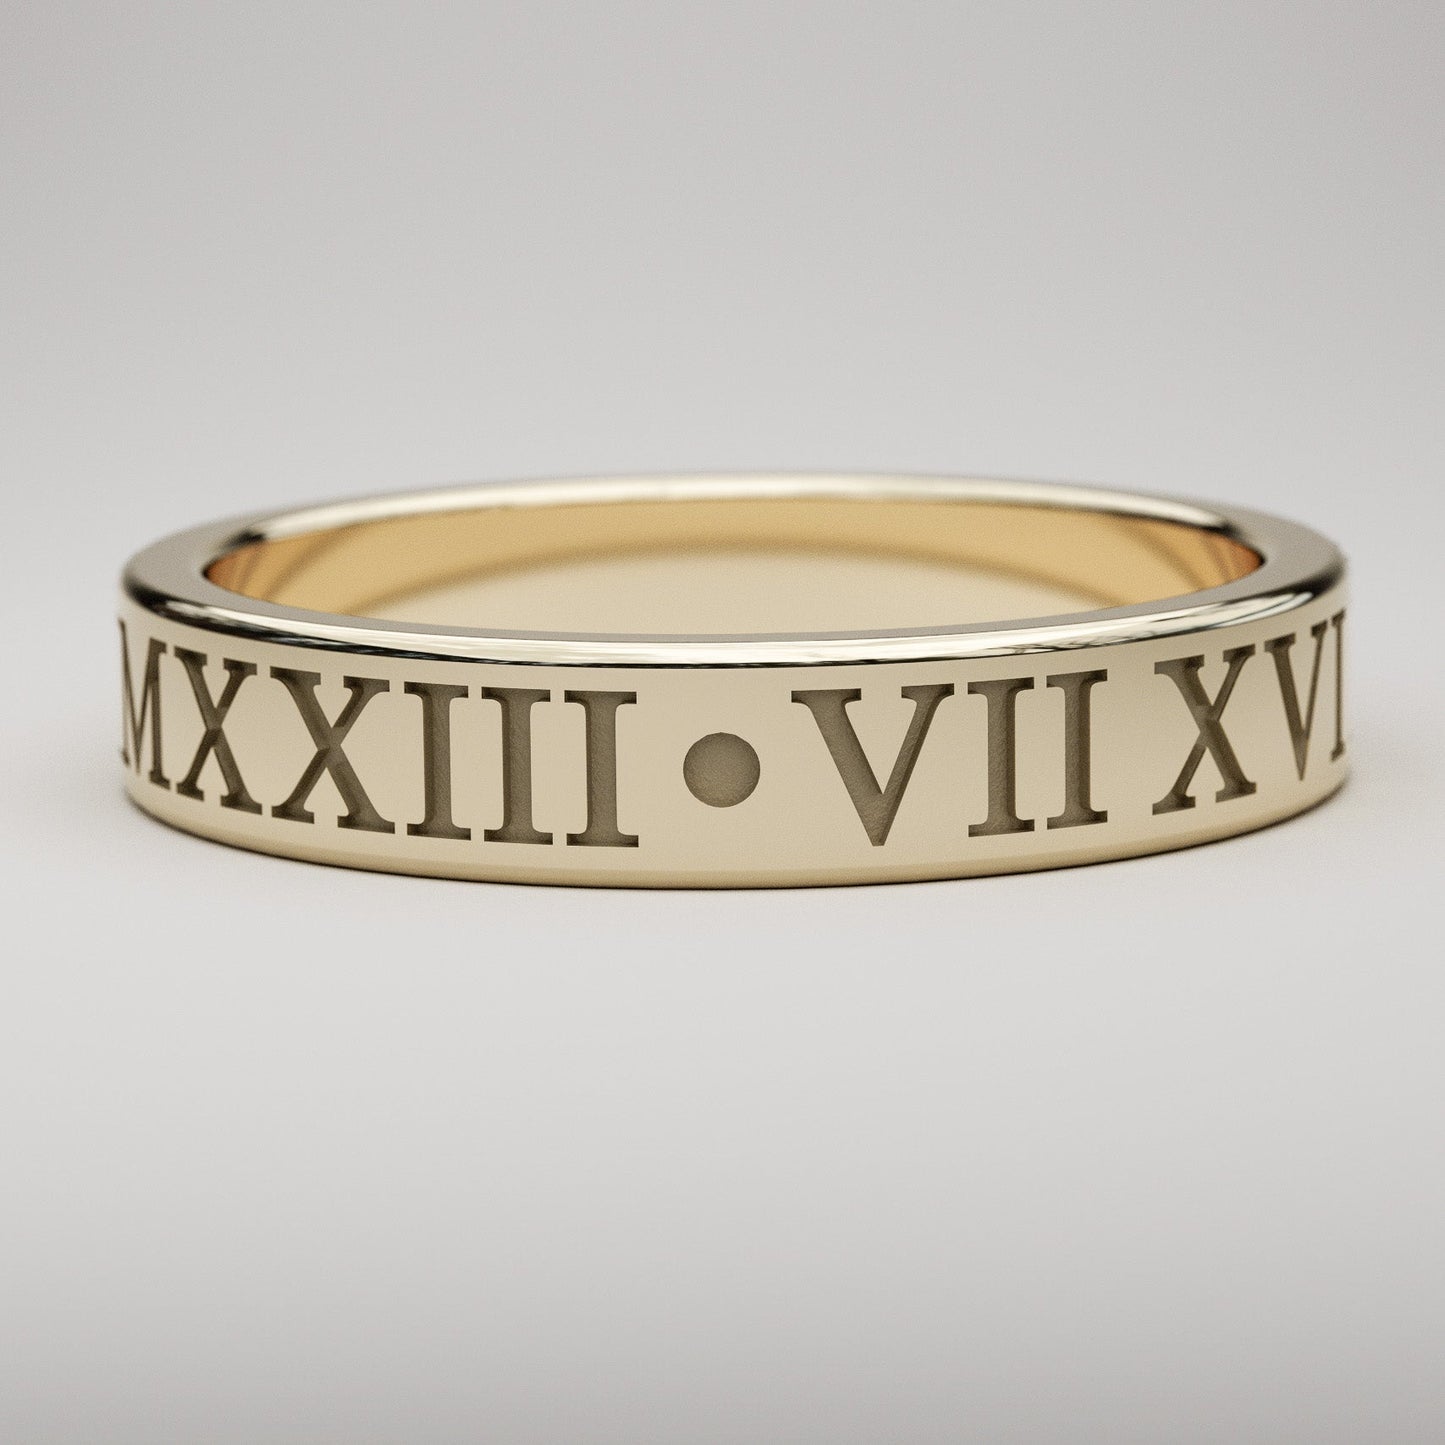 4mm engraved style custom Roman Numeral date ring in yellow gold